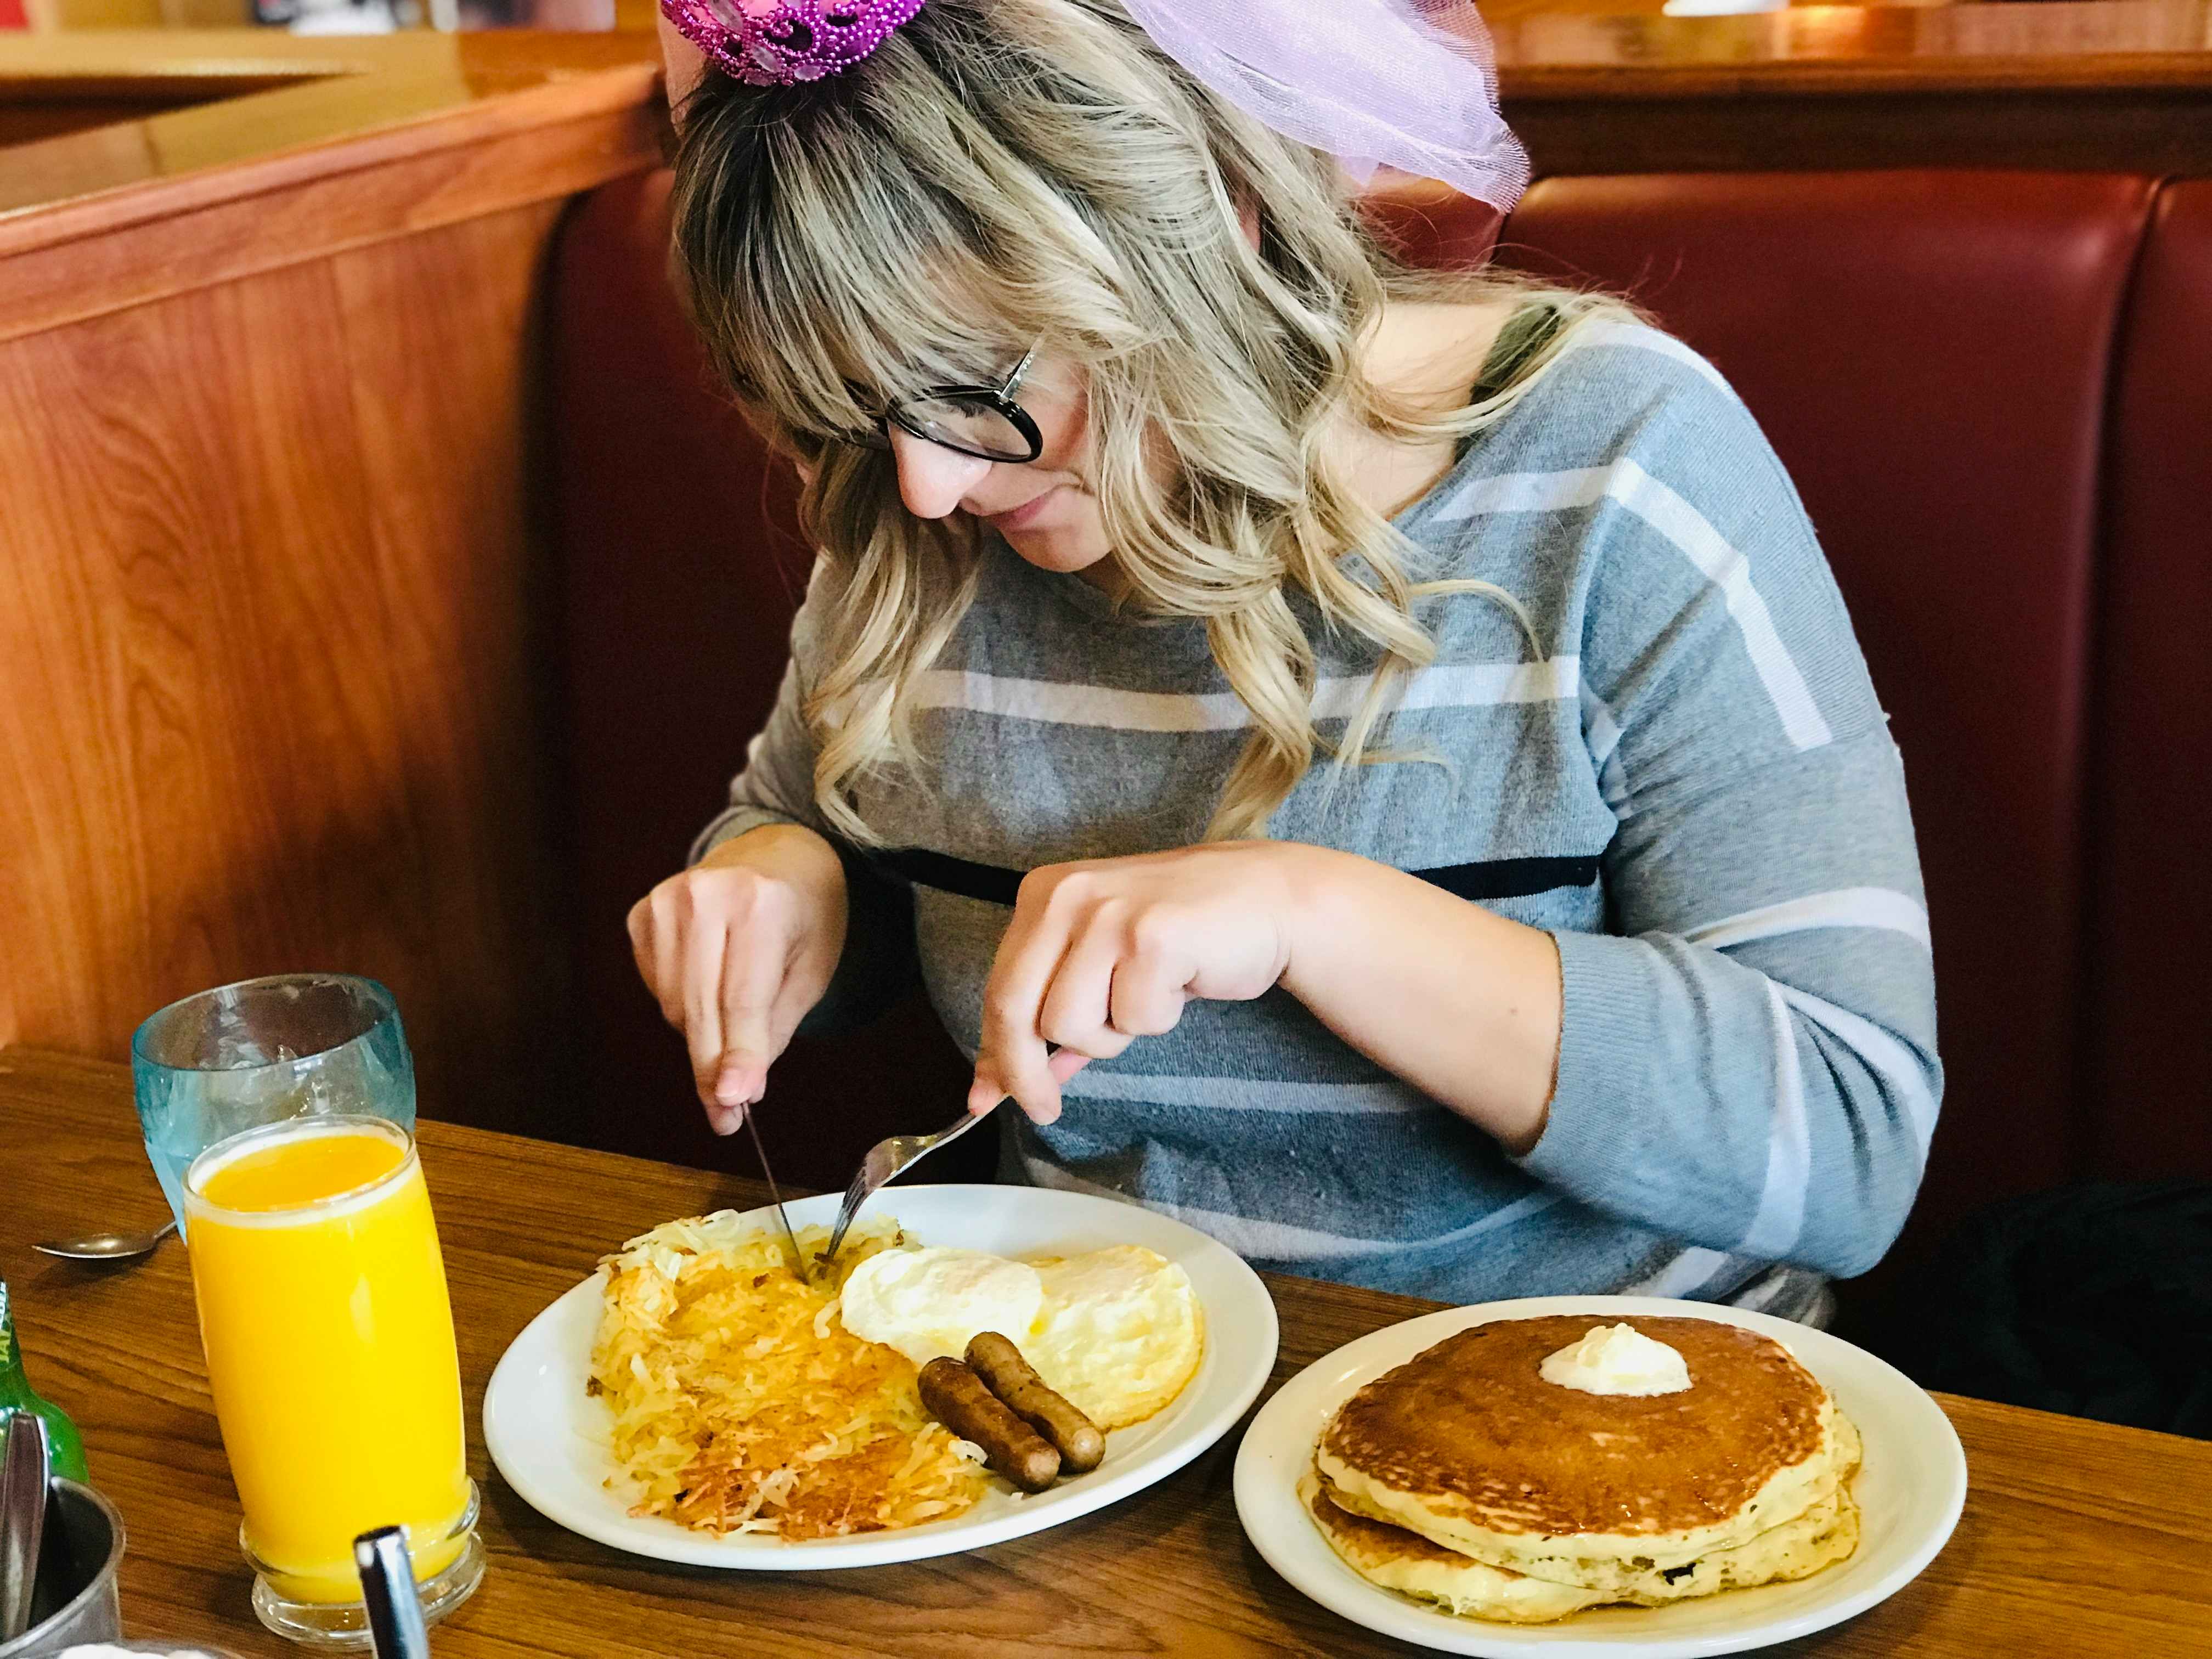 A person wearing a pink tiara using a fork and knife to cut into a Denny's Grand Slam breakfast meal on a table next to a plate of pancakes and a glass of orange juice.